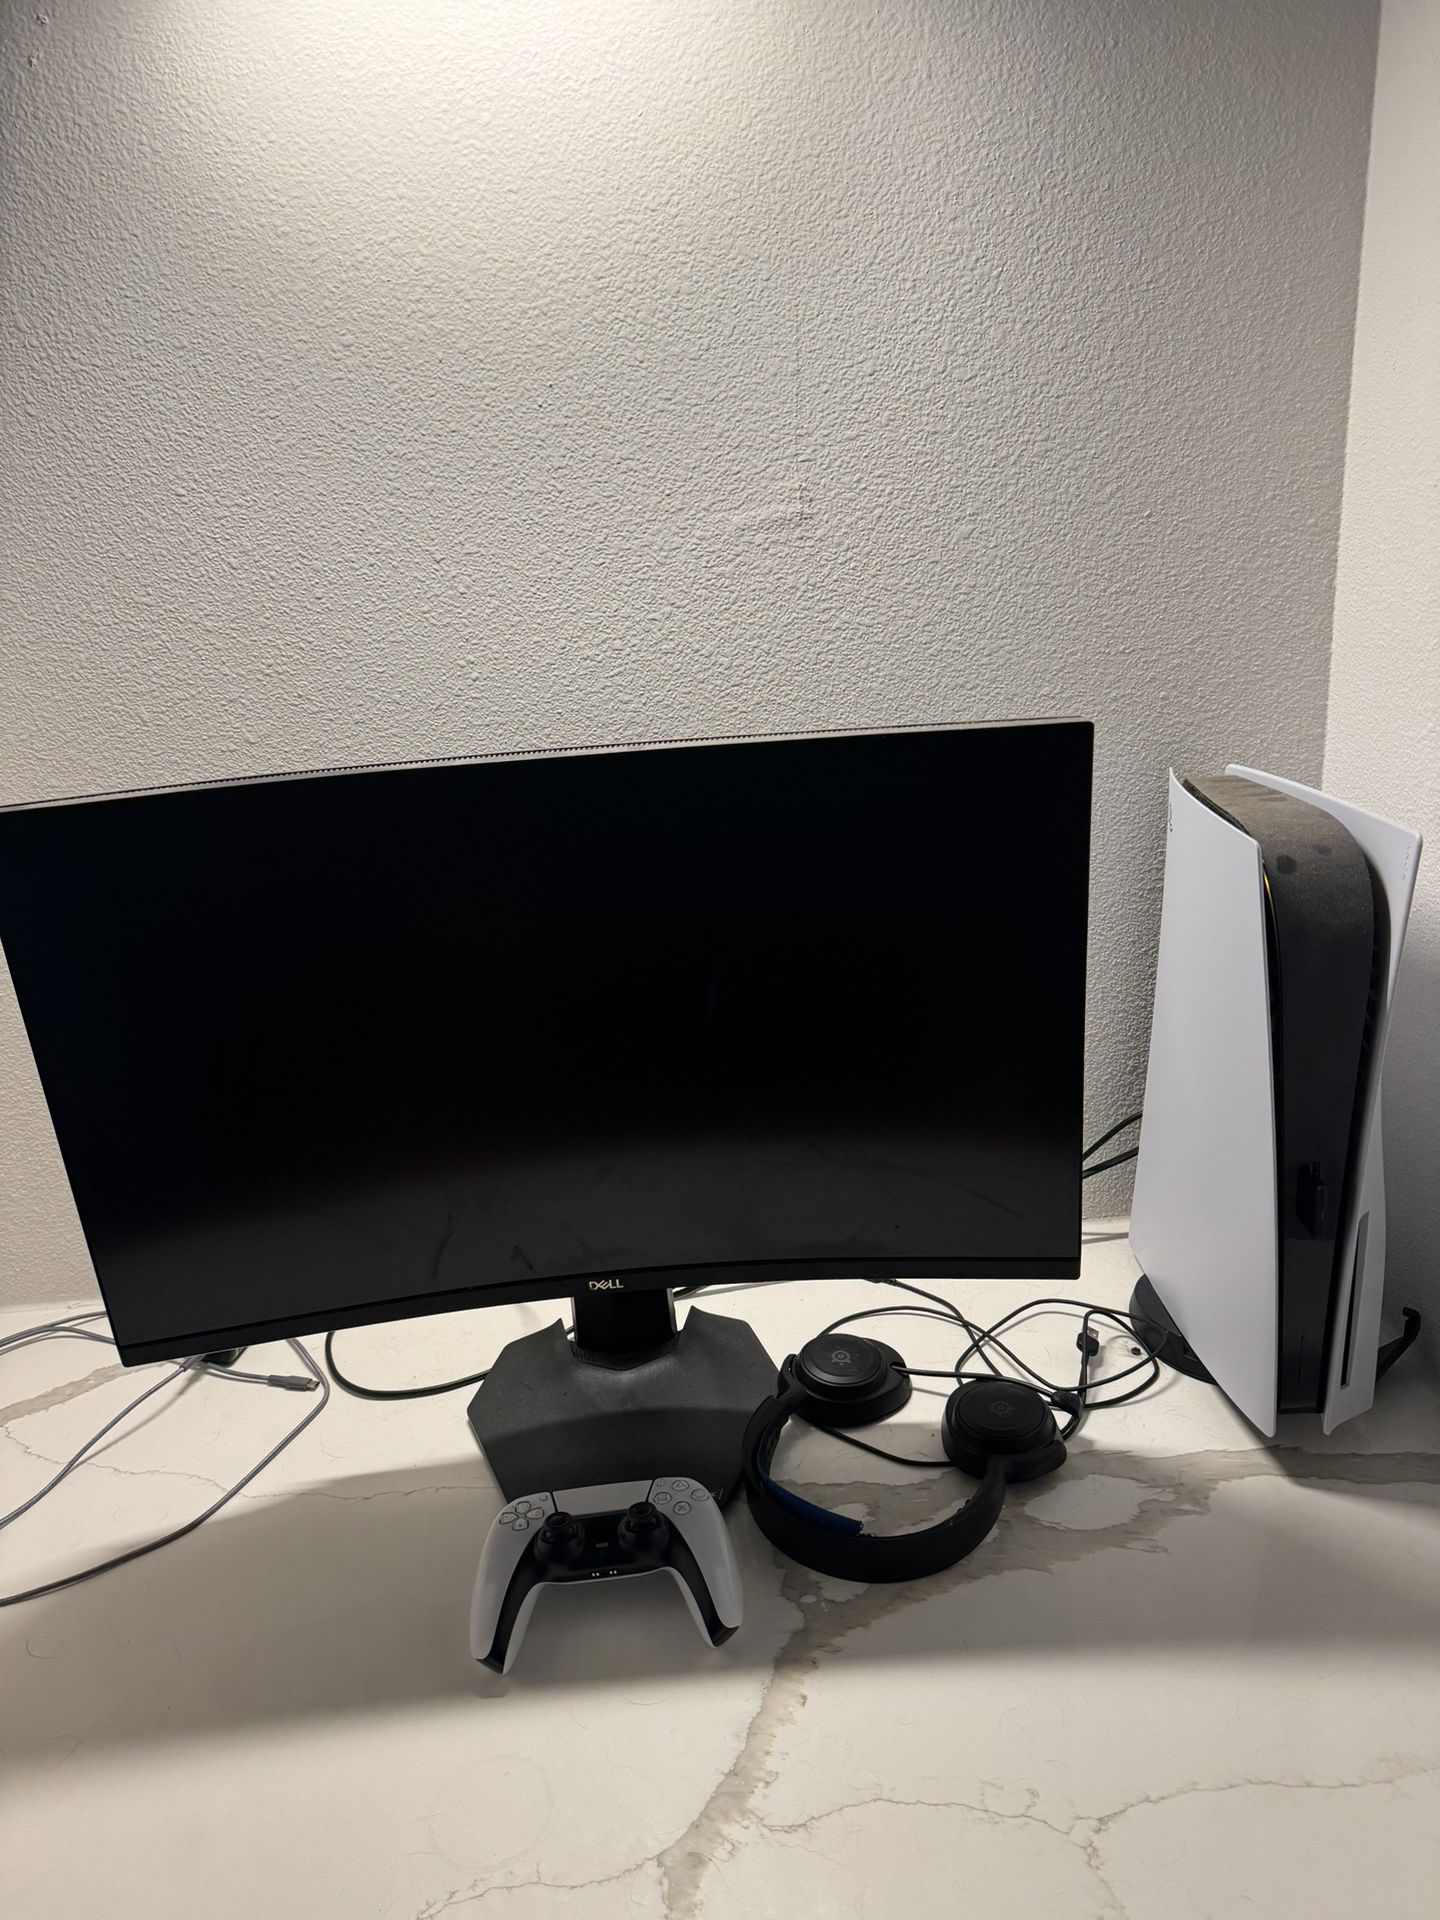 Ps5 And 27’ Dell Curved Monitor